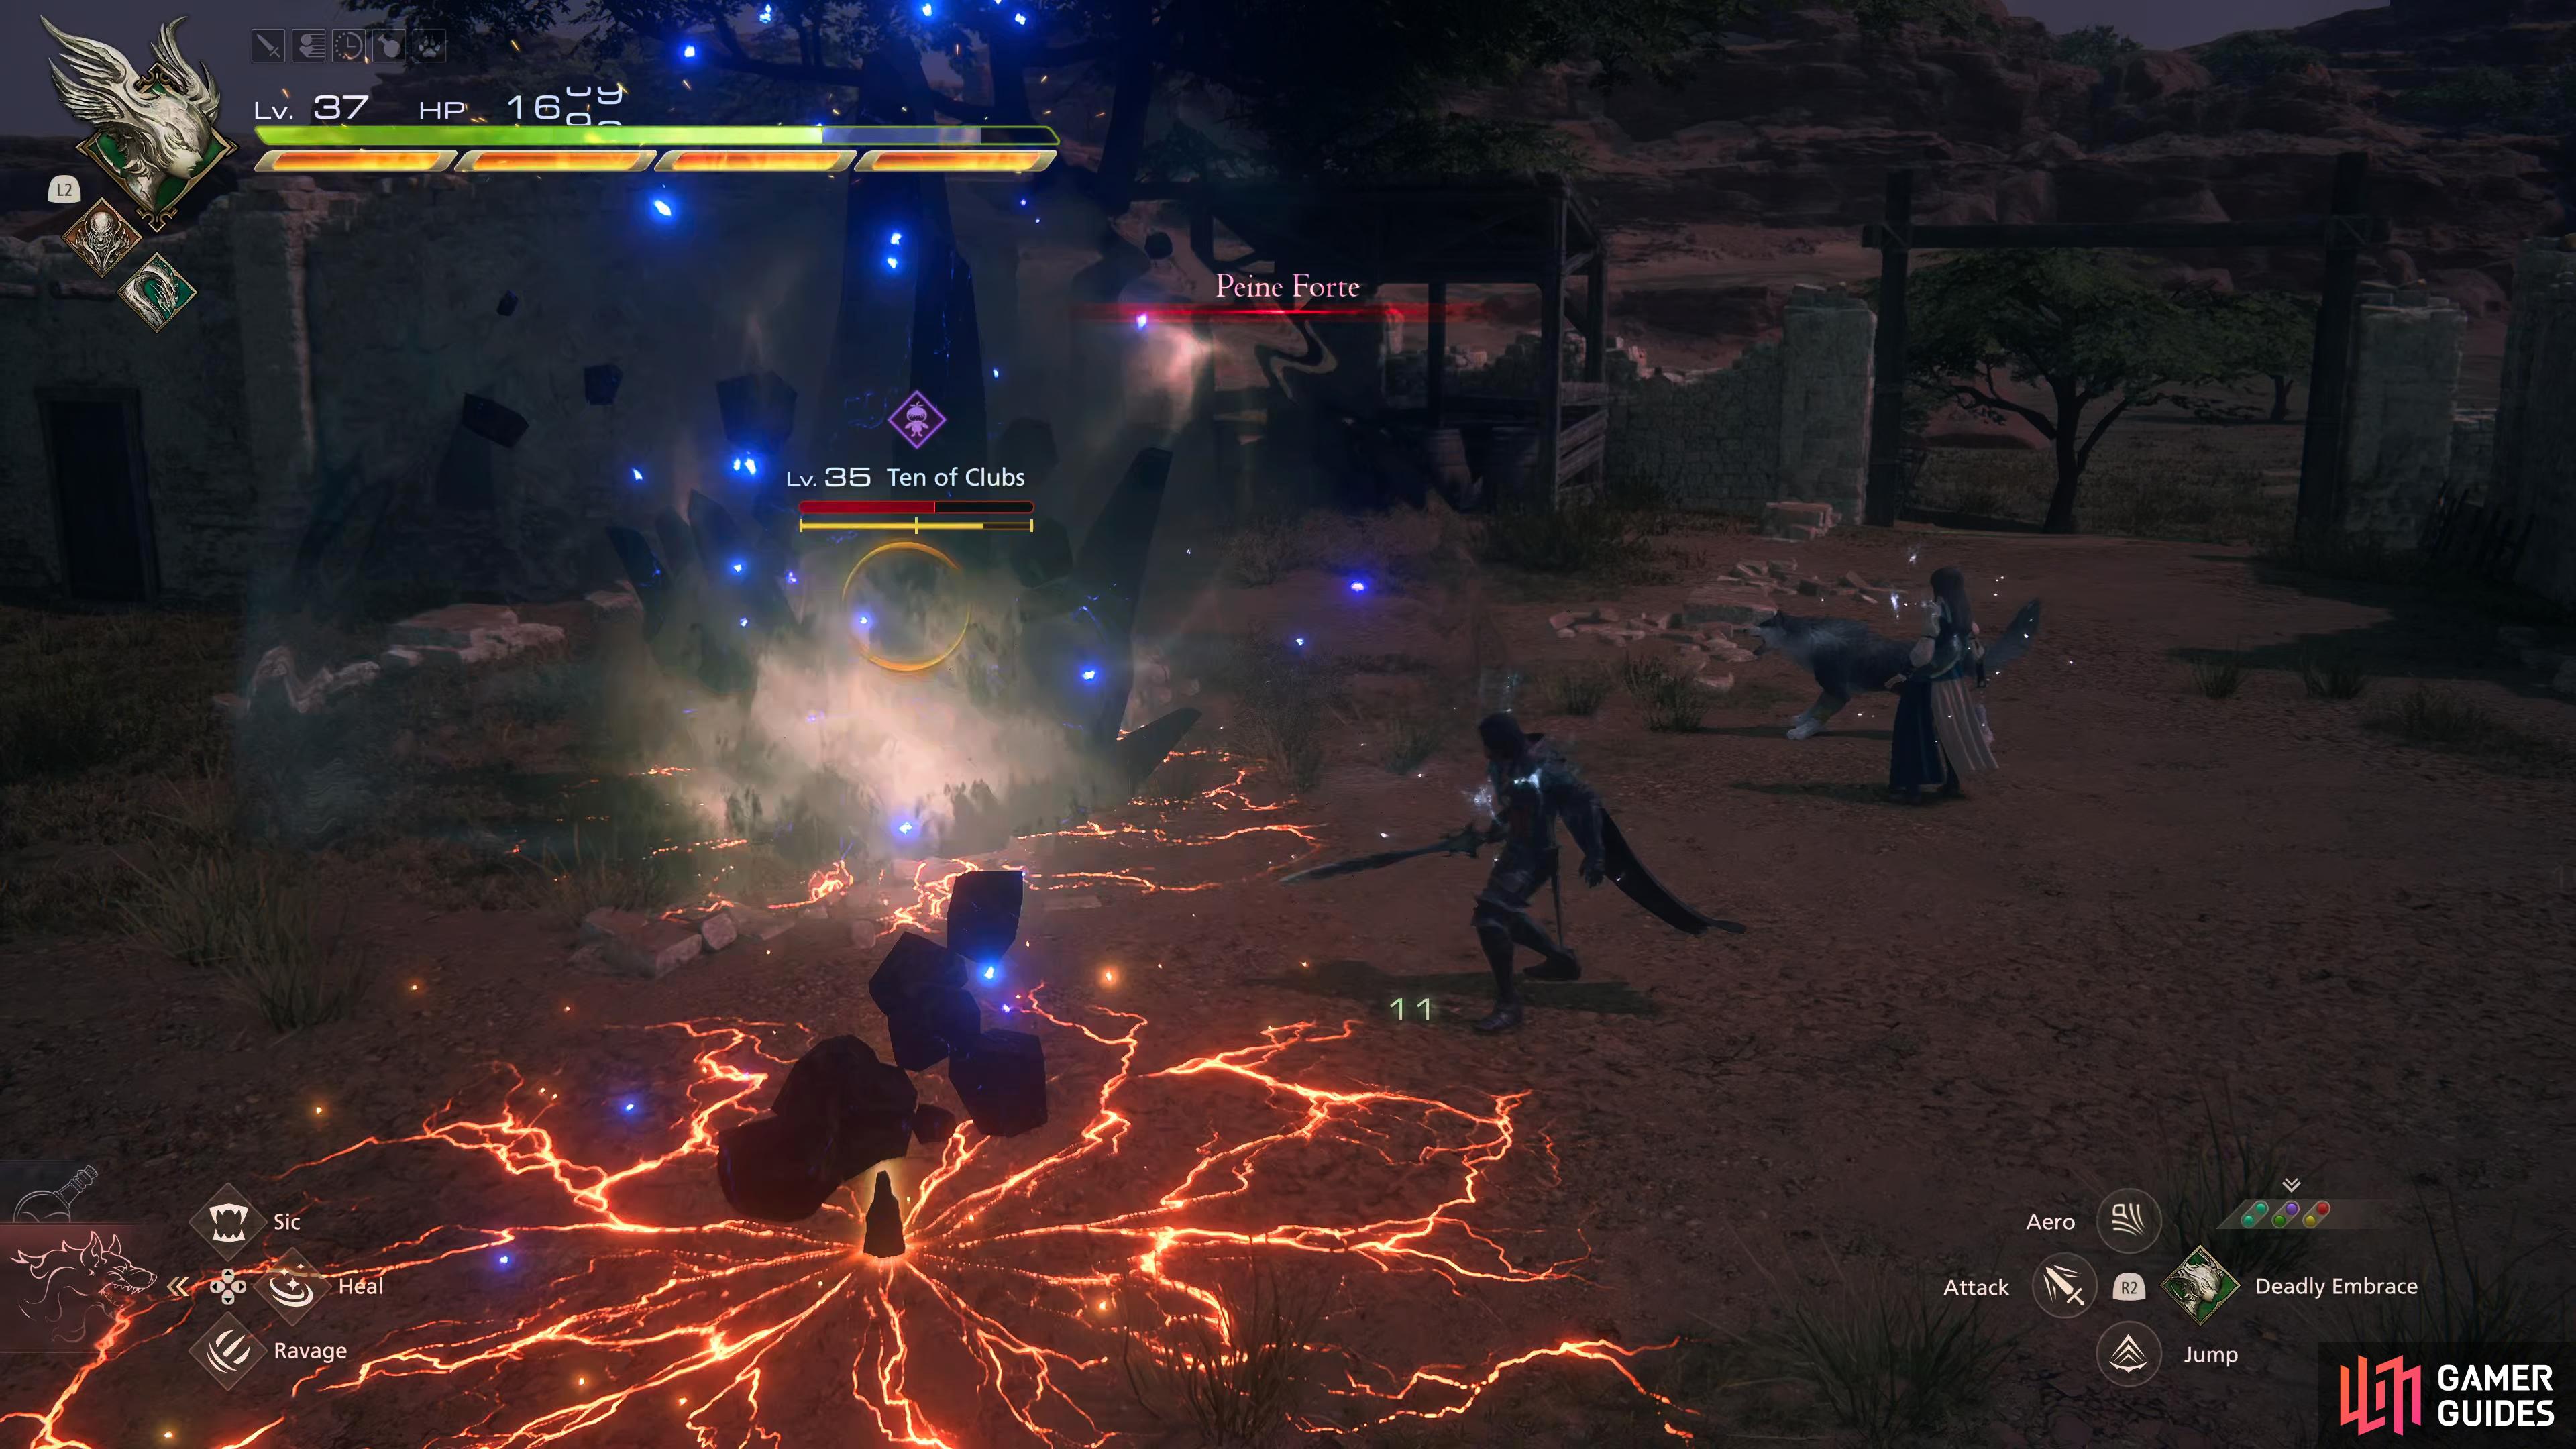 Final Fantasy 16 in a review-bomb tug-of-war as players fight to